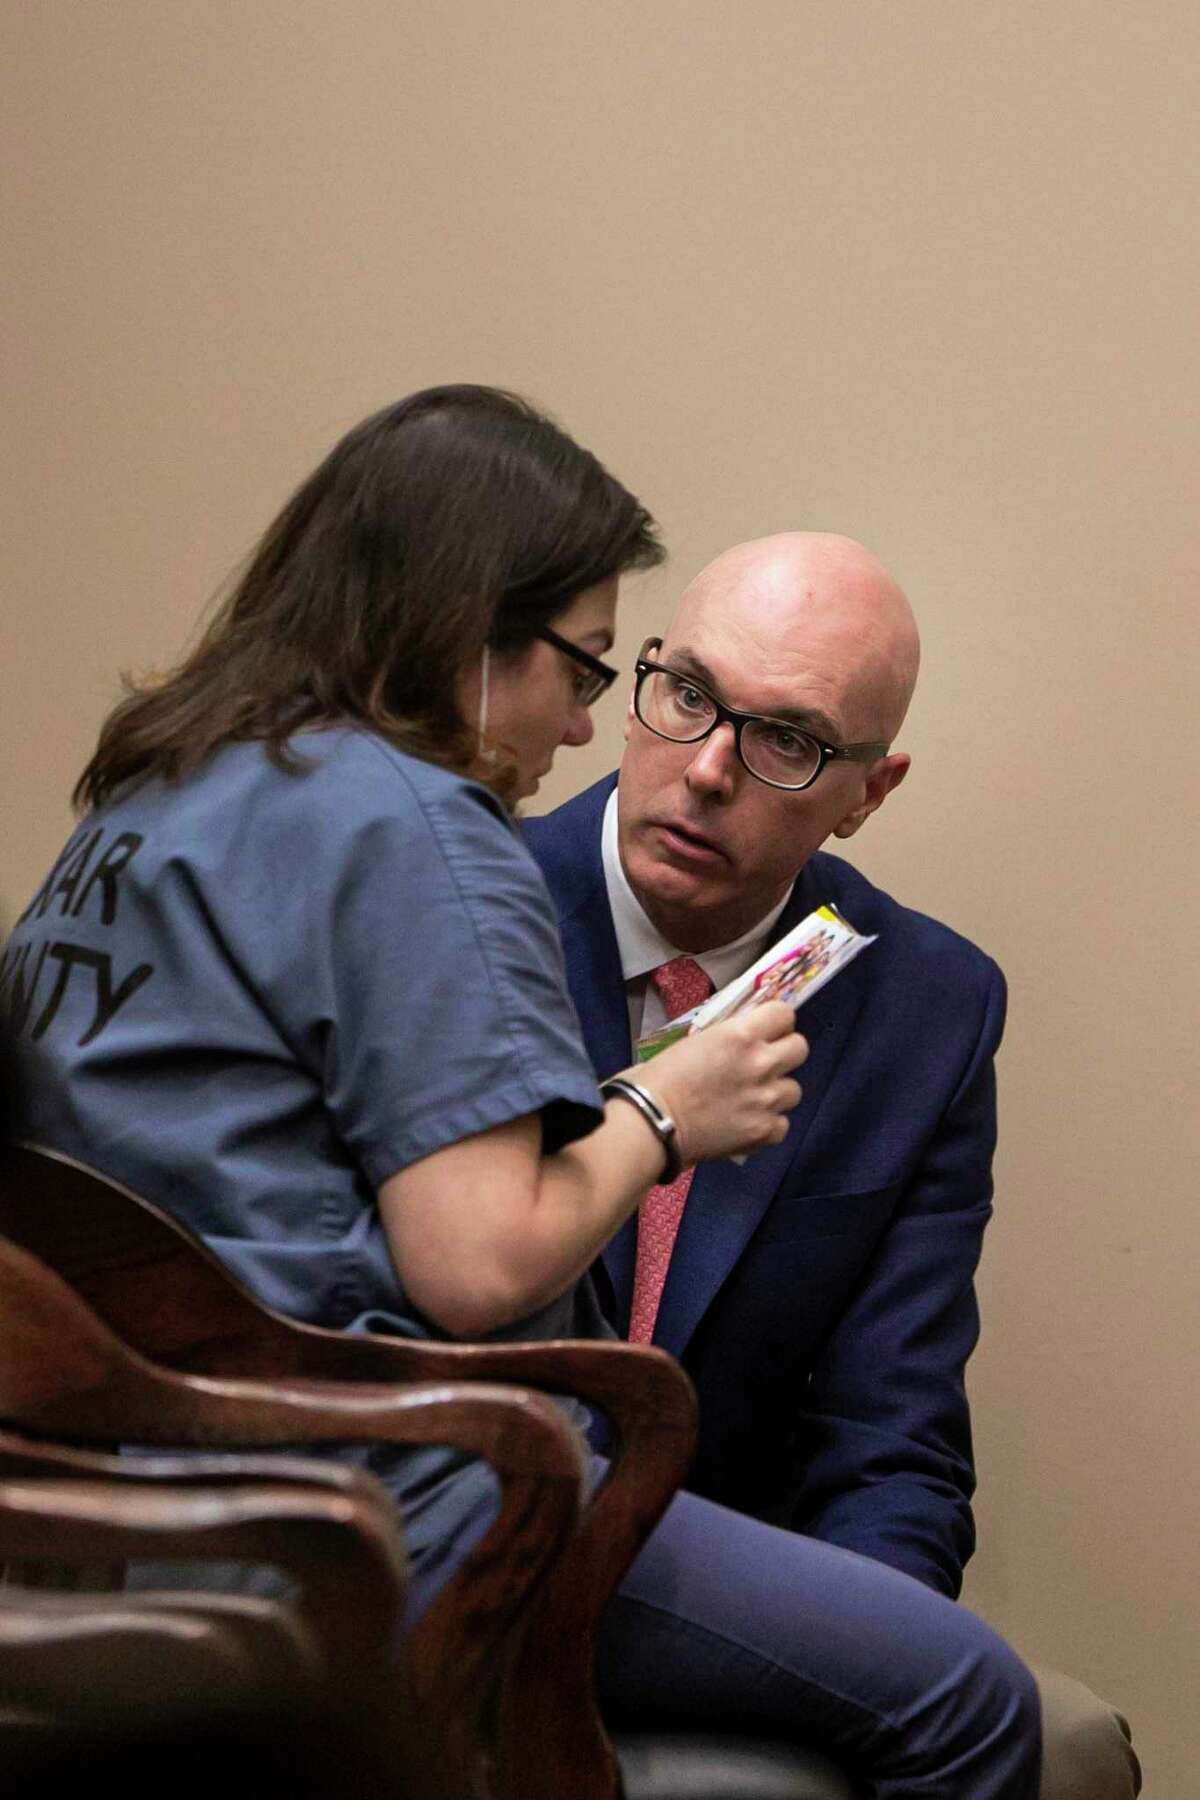 Defense attorney John Kuntz confers with client Krystal Margaret Jessica Rodriguez as she looks at family photos during her sentencing Thursday in the 399th District Court . She pleaded guilty to murder for fatally shooting her ex-husband, Jared Rodriguez, in December.